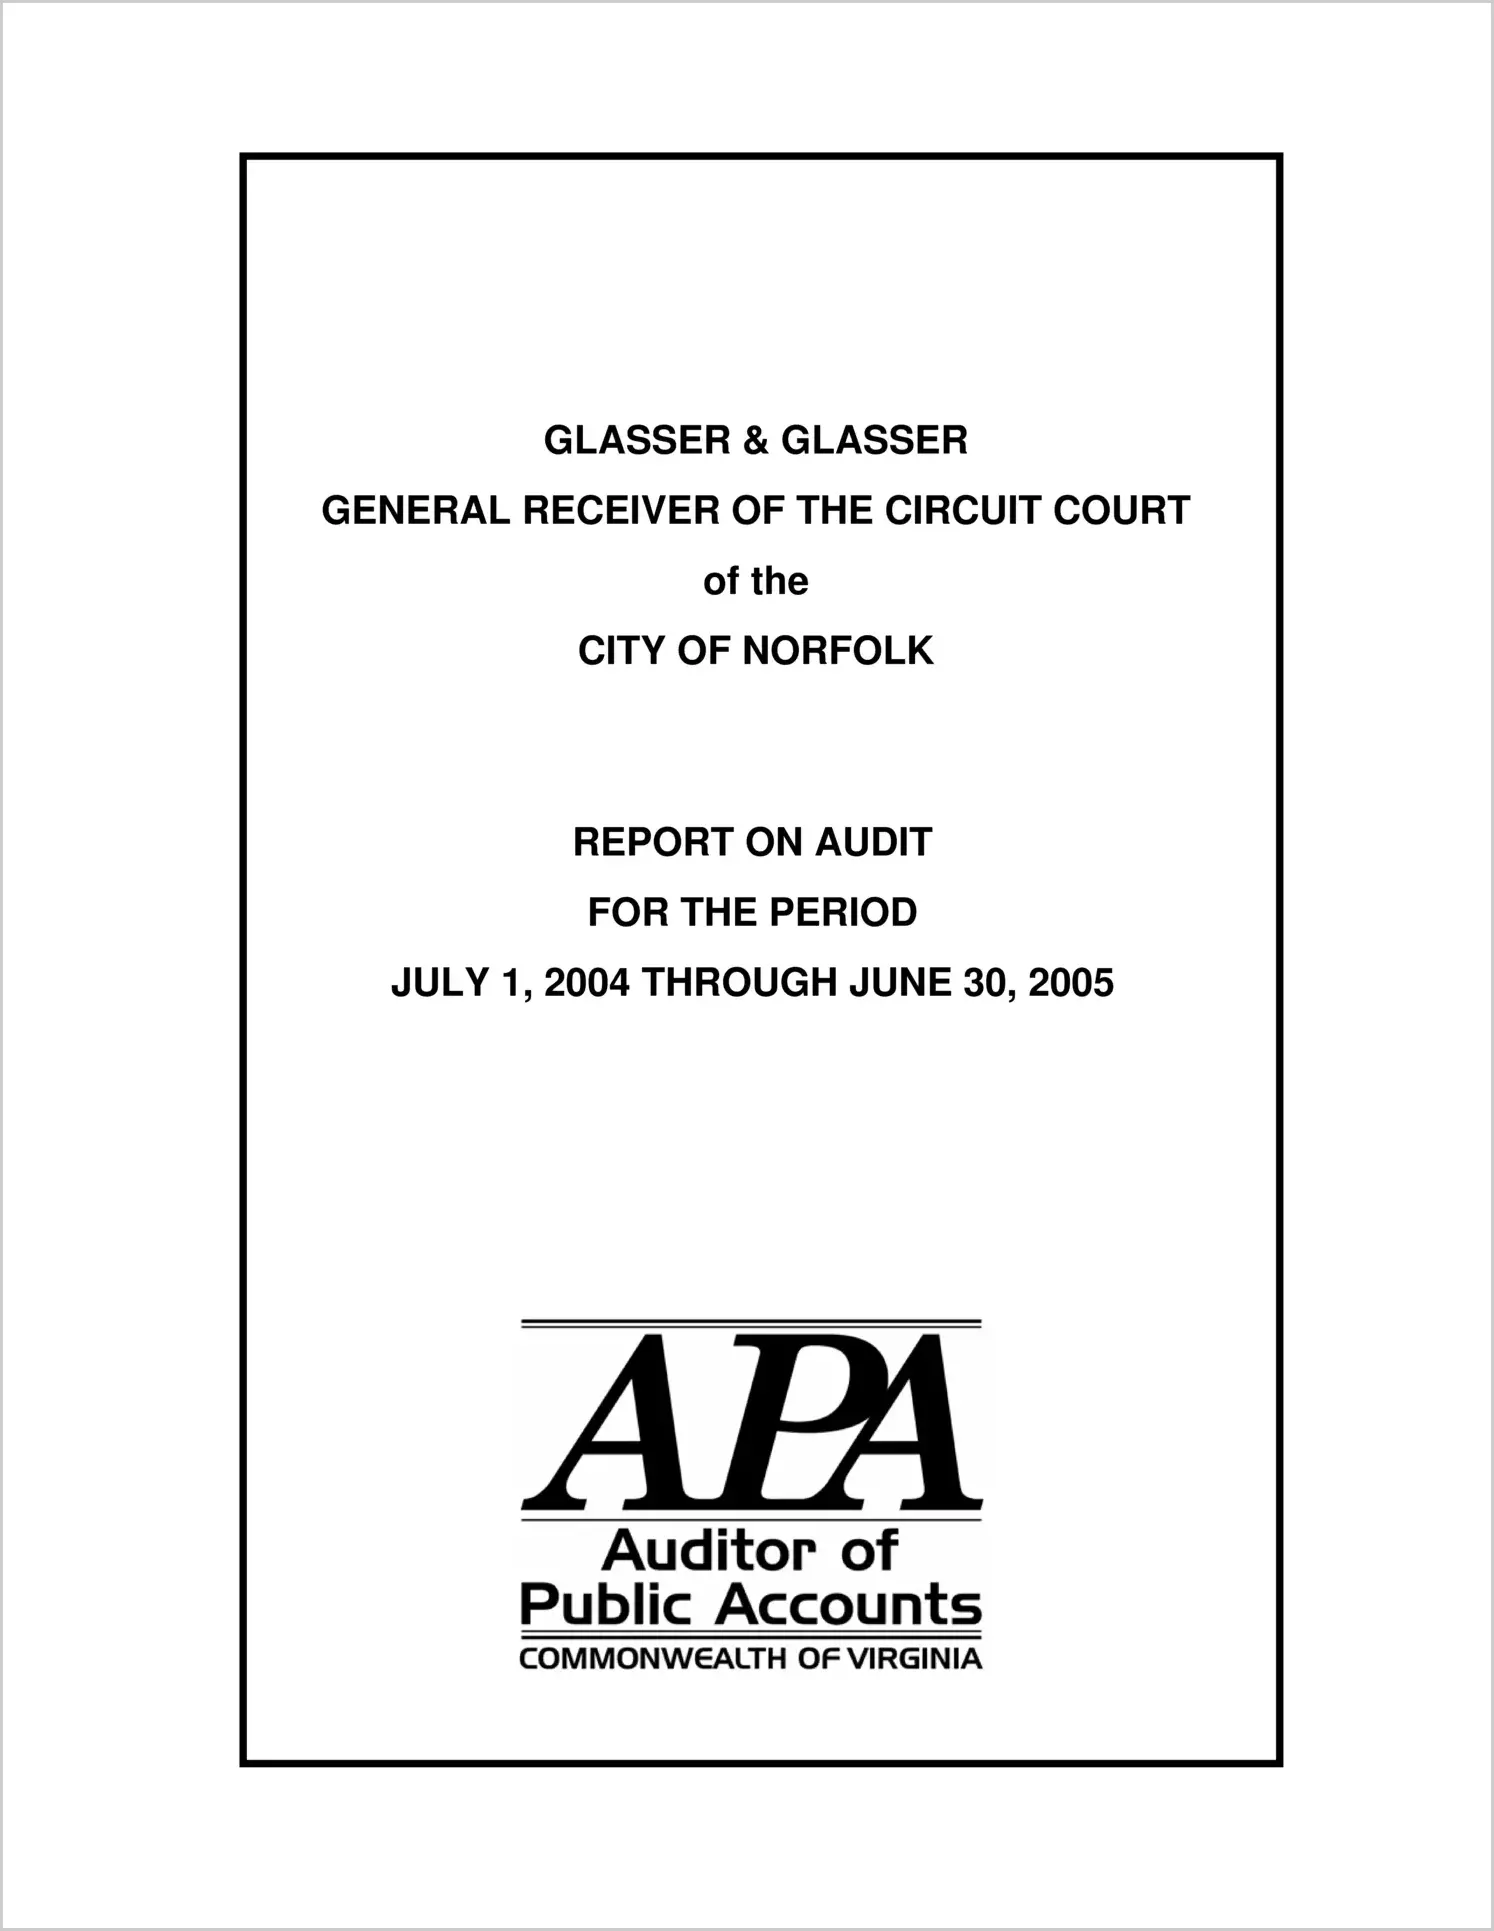 General Receiver of the Circuit Court of the City of Norfolk for the period July 1, 2004 through June 30, 2005